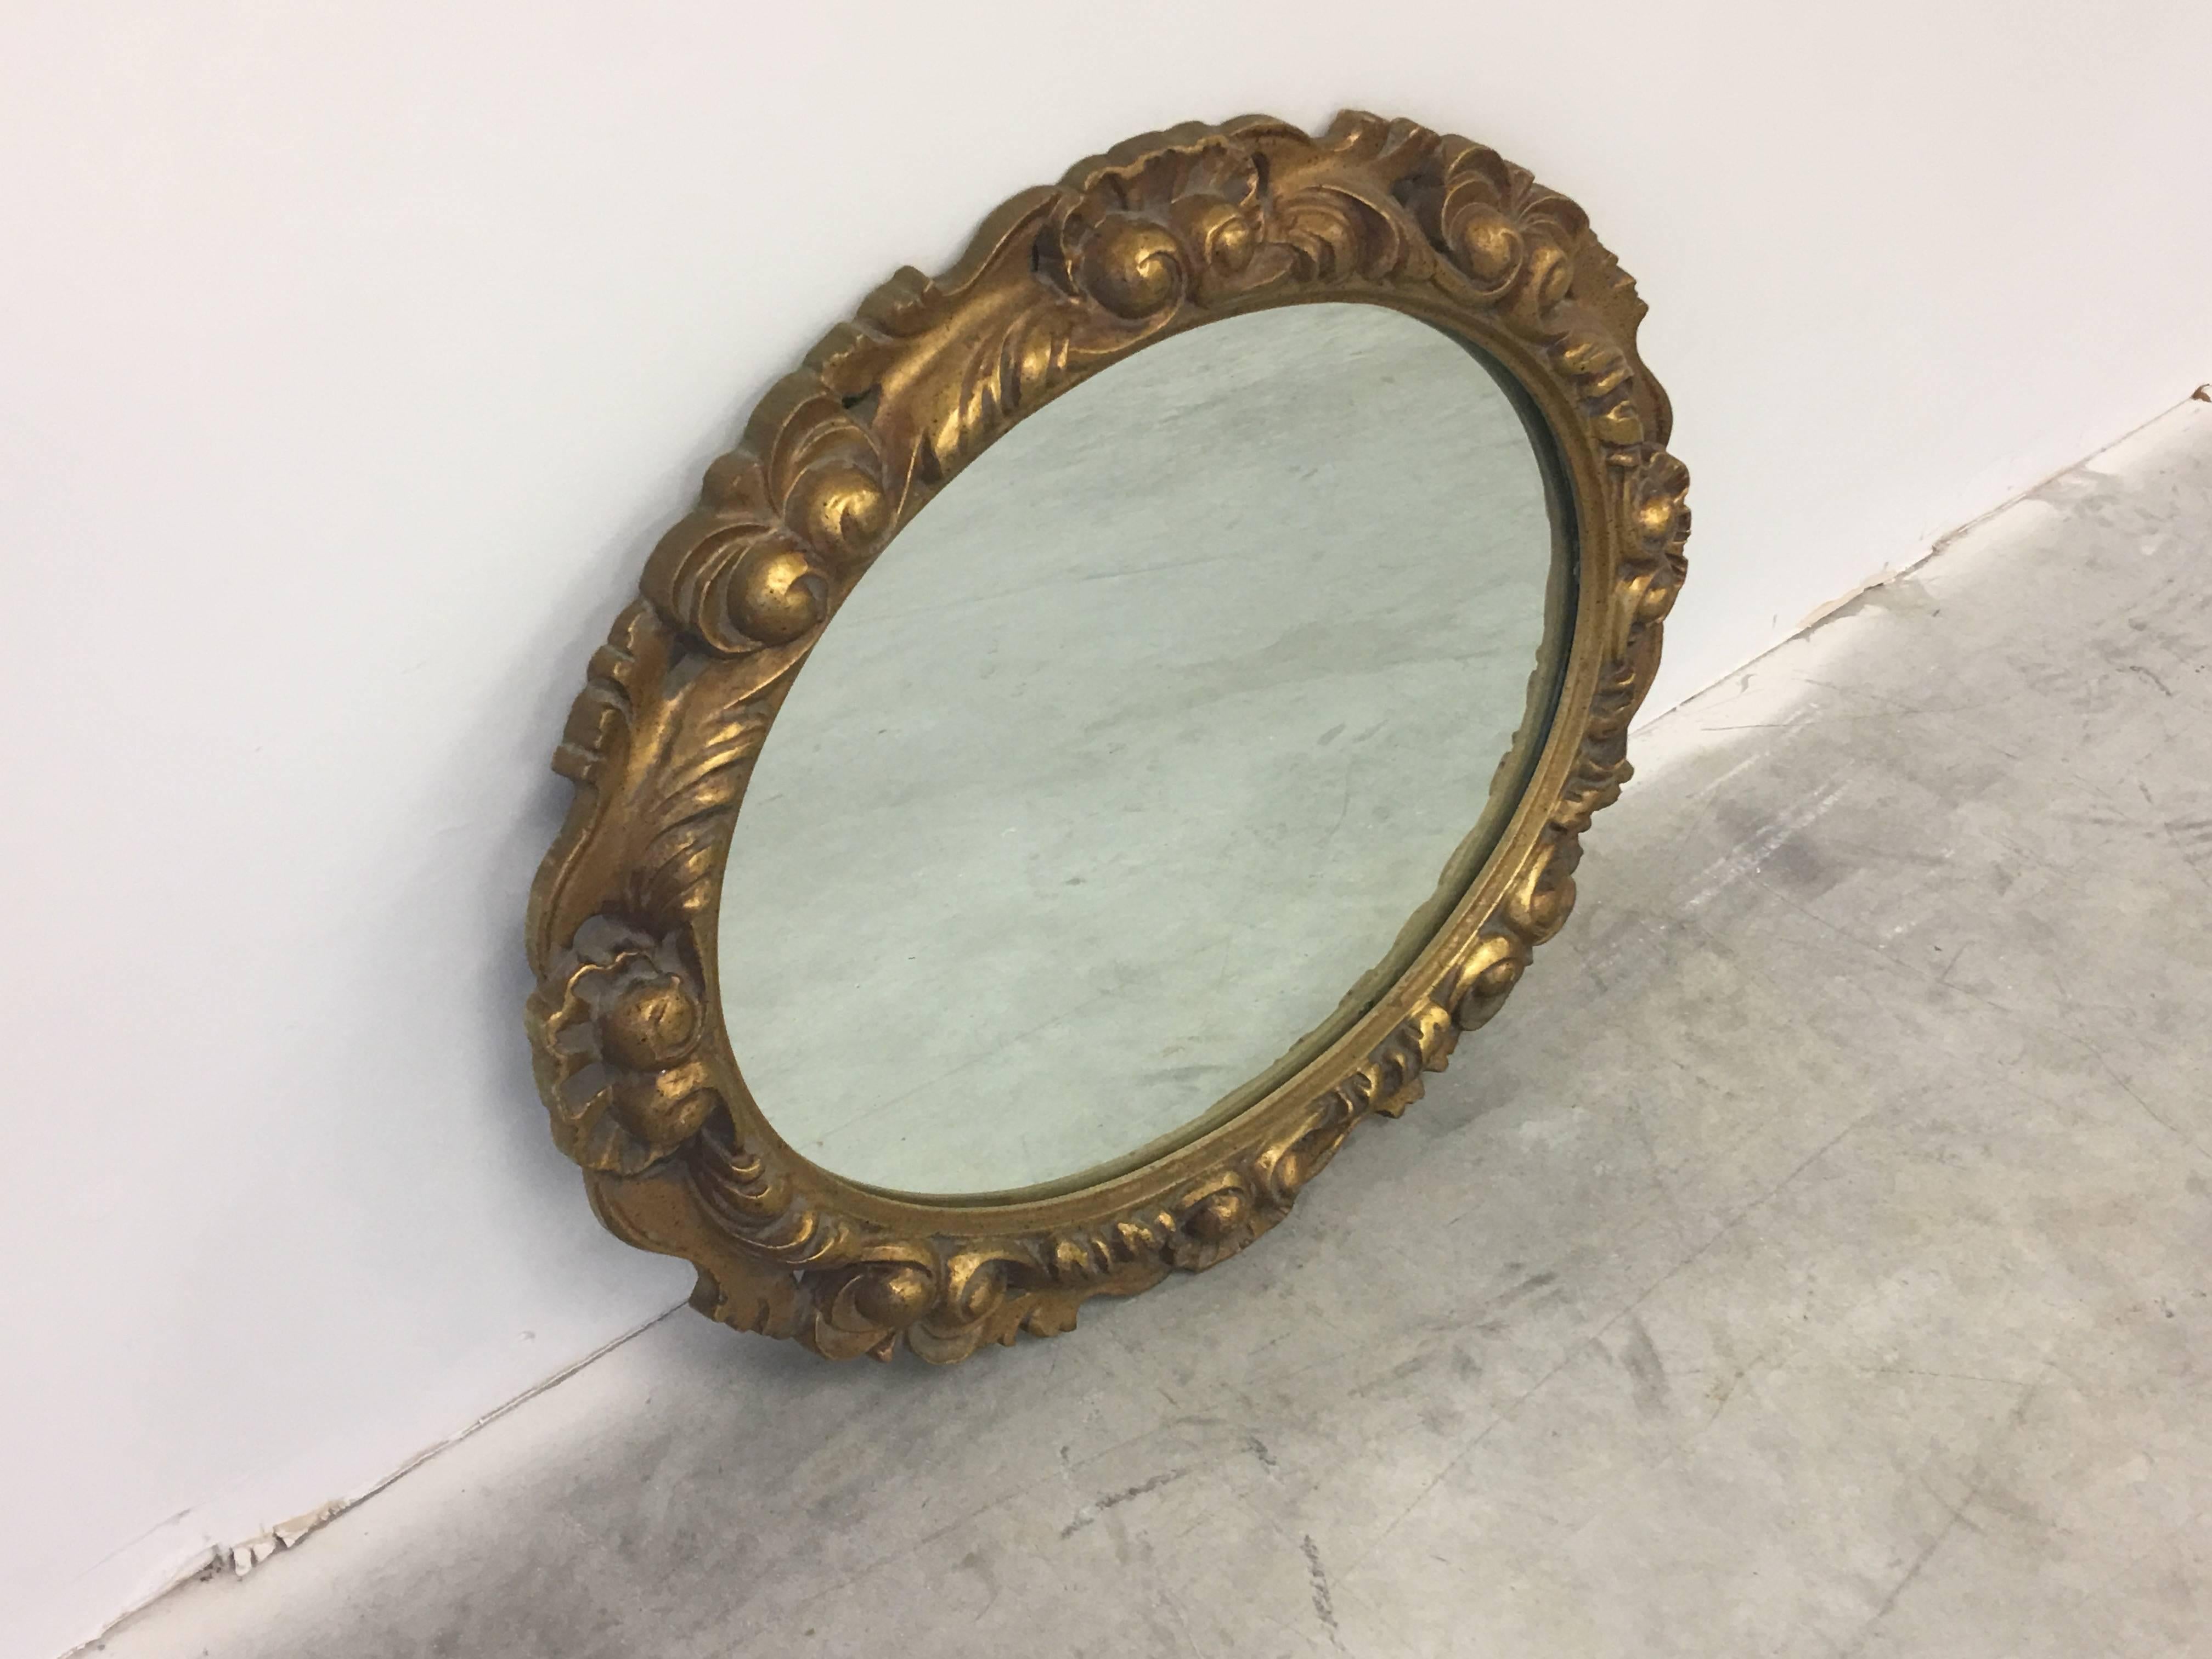 An immaculate, 19th century style oval gilt mirror with heavy detailing along the border. Solid wood. Horizontal and vertical hanging.
 